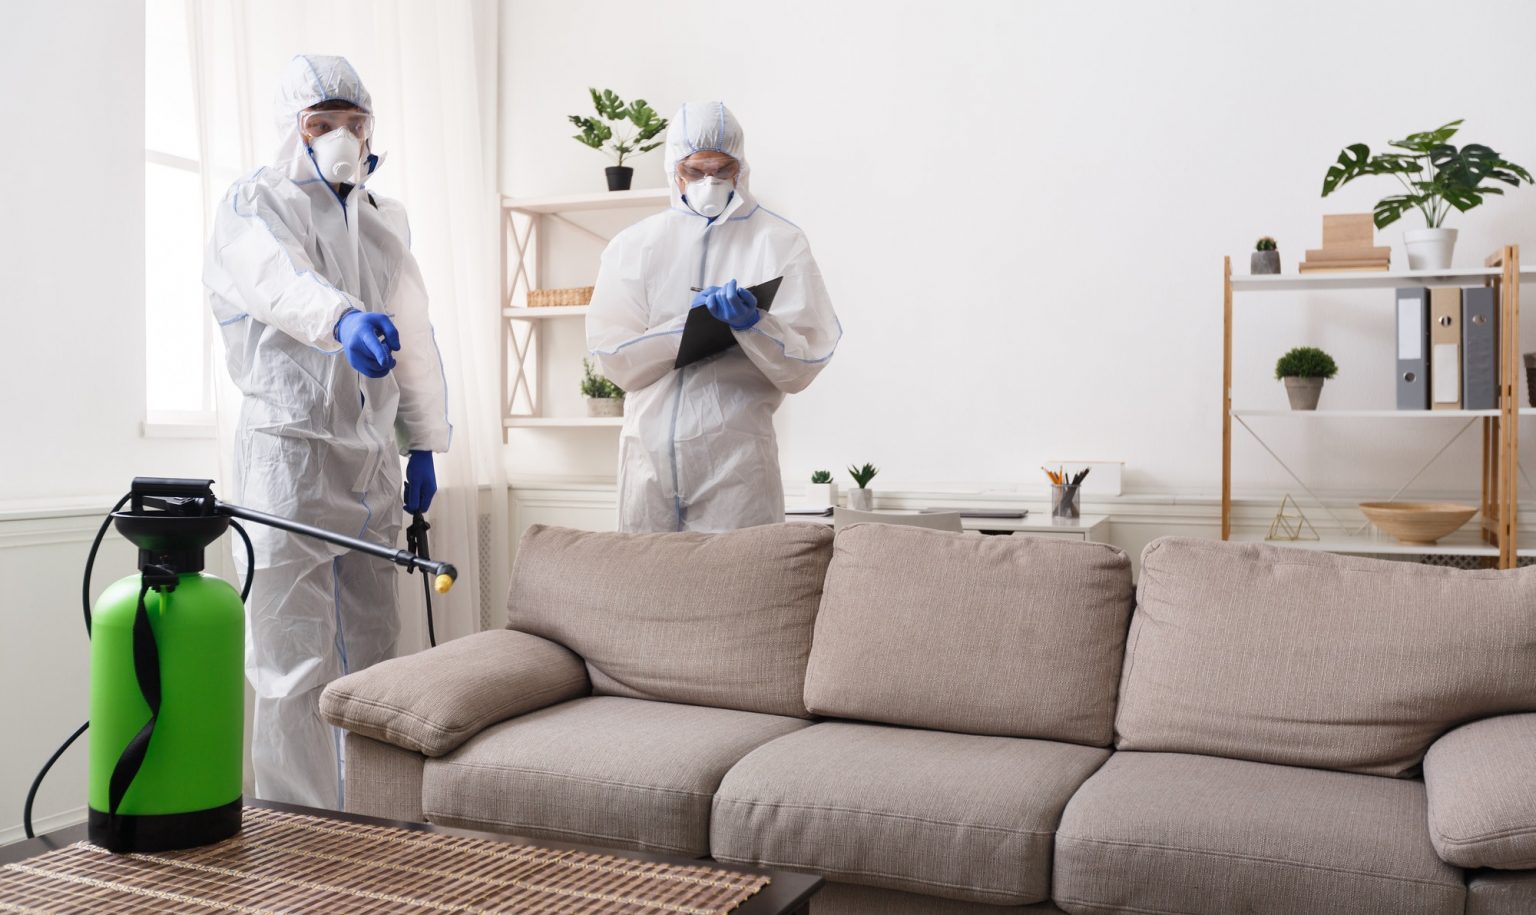 Men in virus protective suit making treatment of sofas